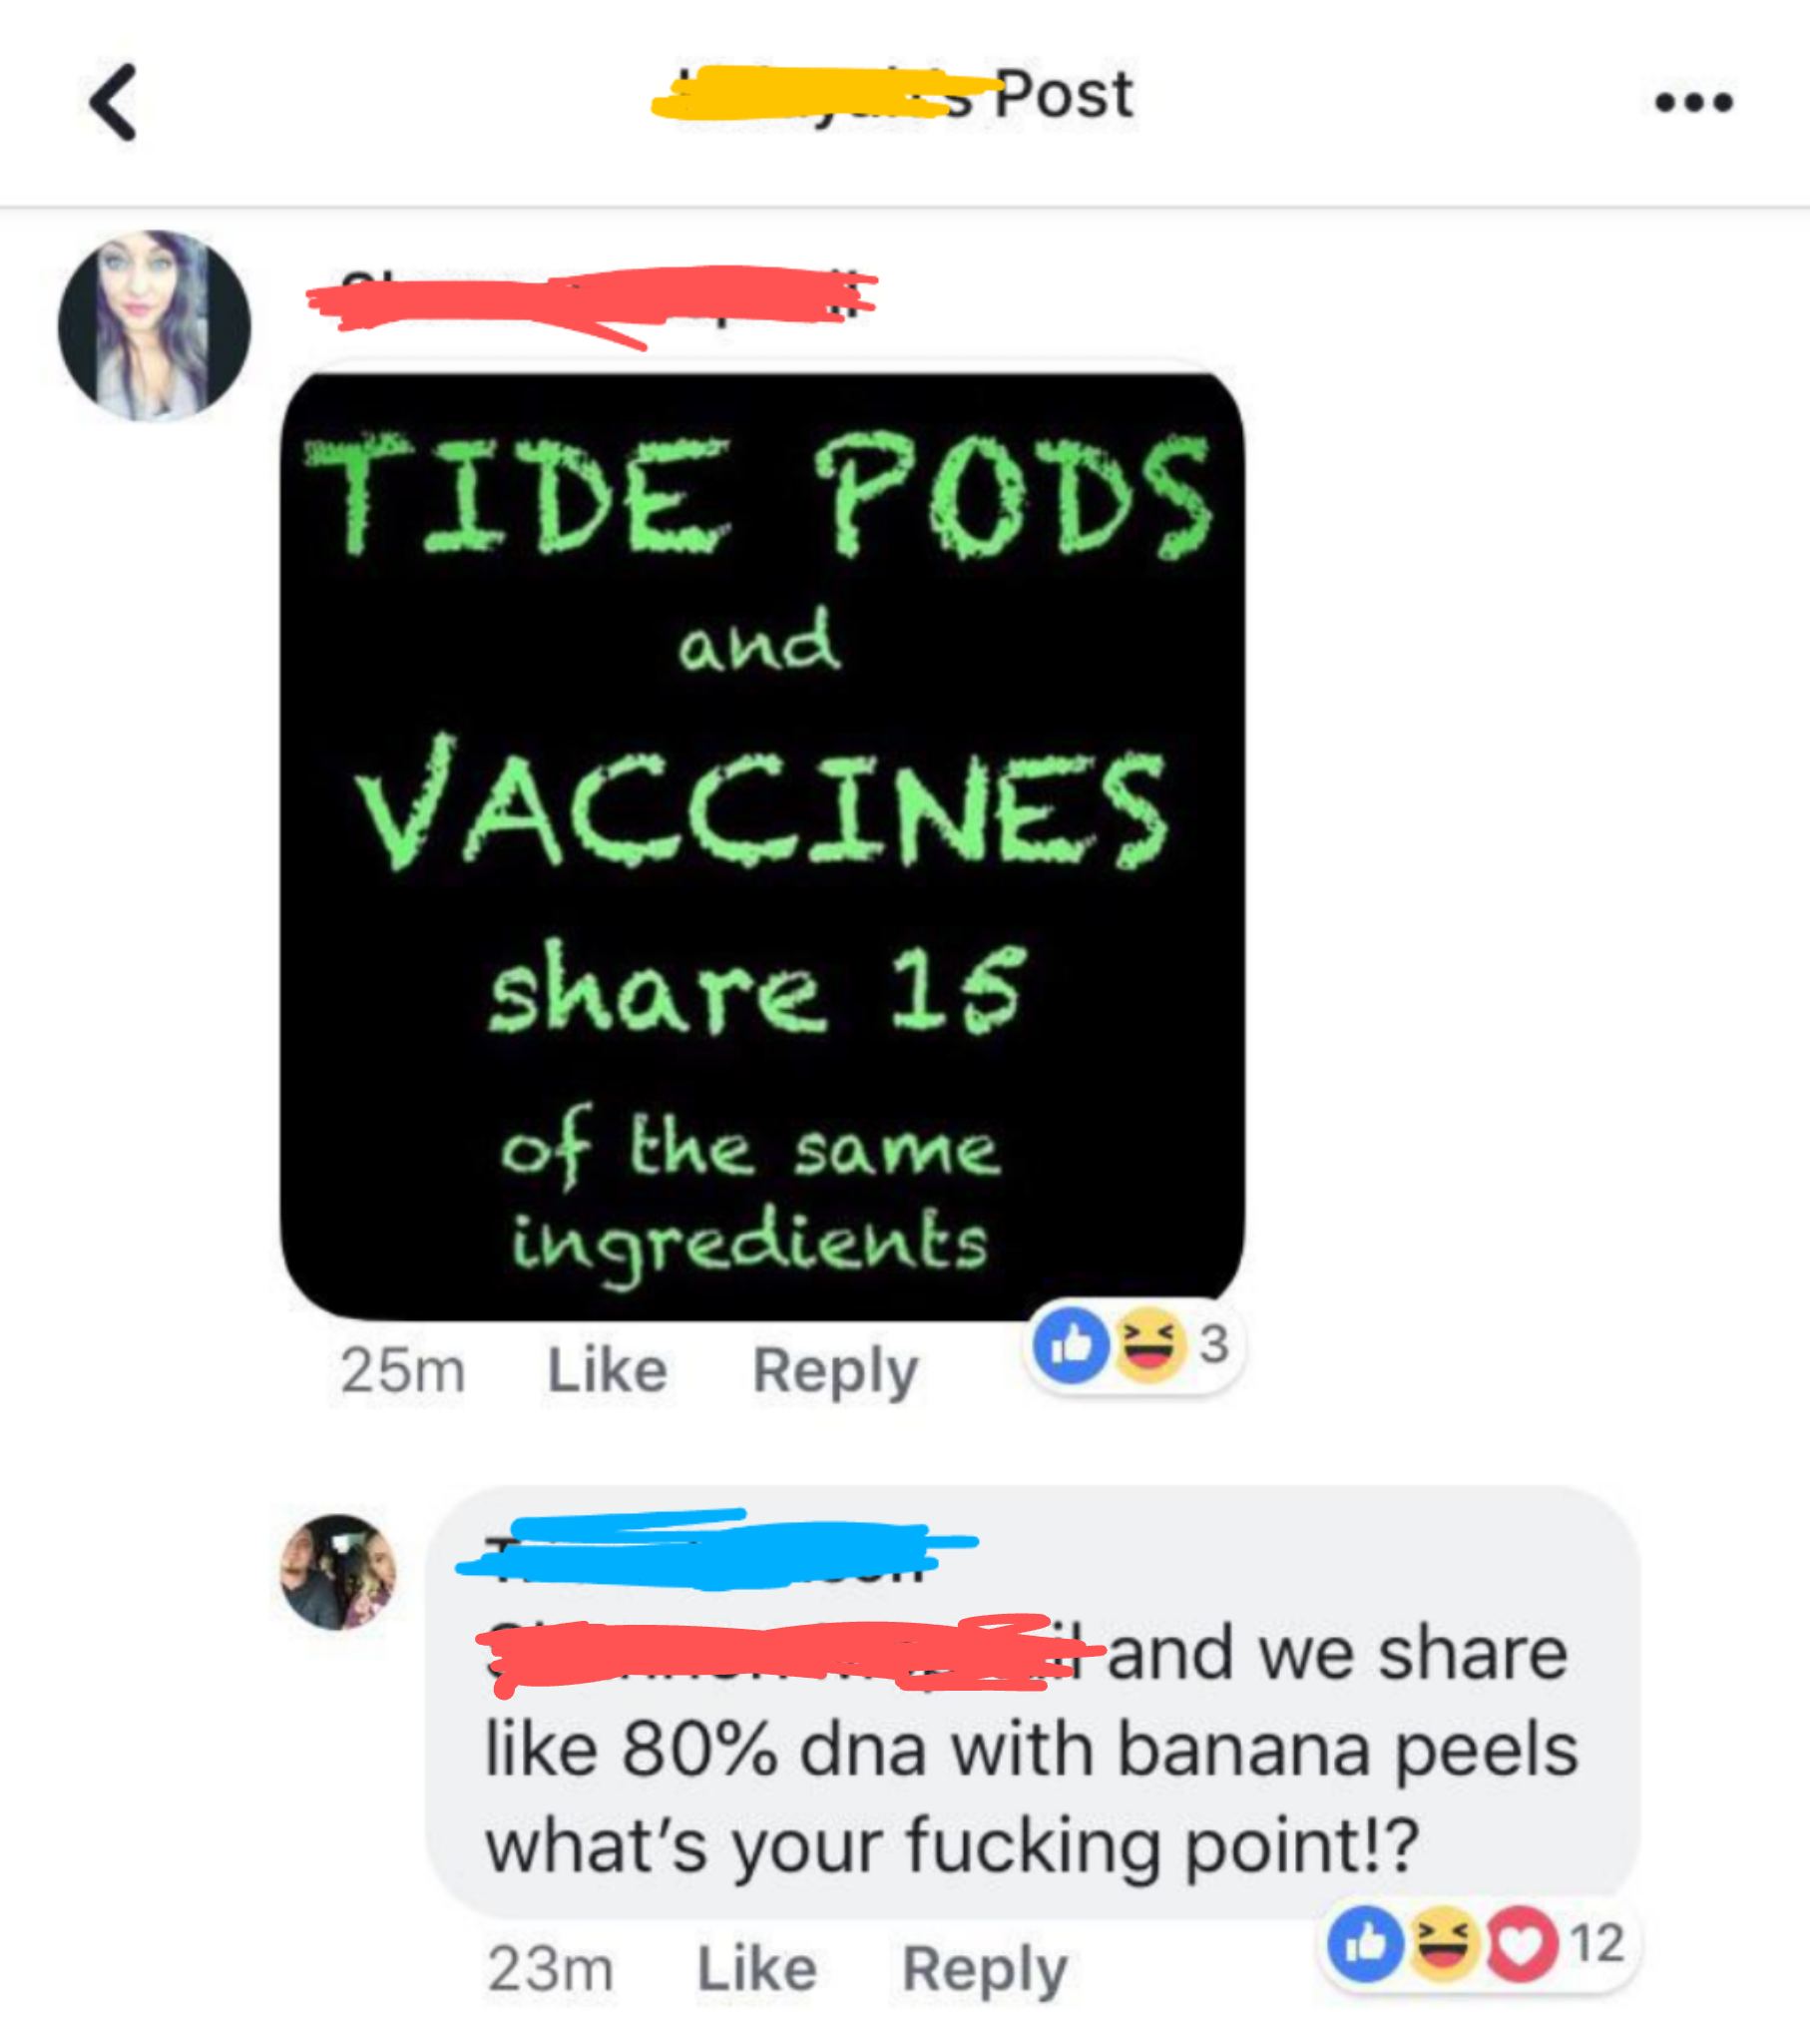 Banana peel - Post Post Tide Pods and Vaccines 15 of the same ingredients 25m 33 and we 80% dna with banana peels what's your fucking point!? 23m 012